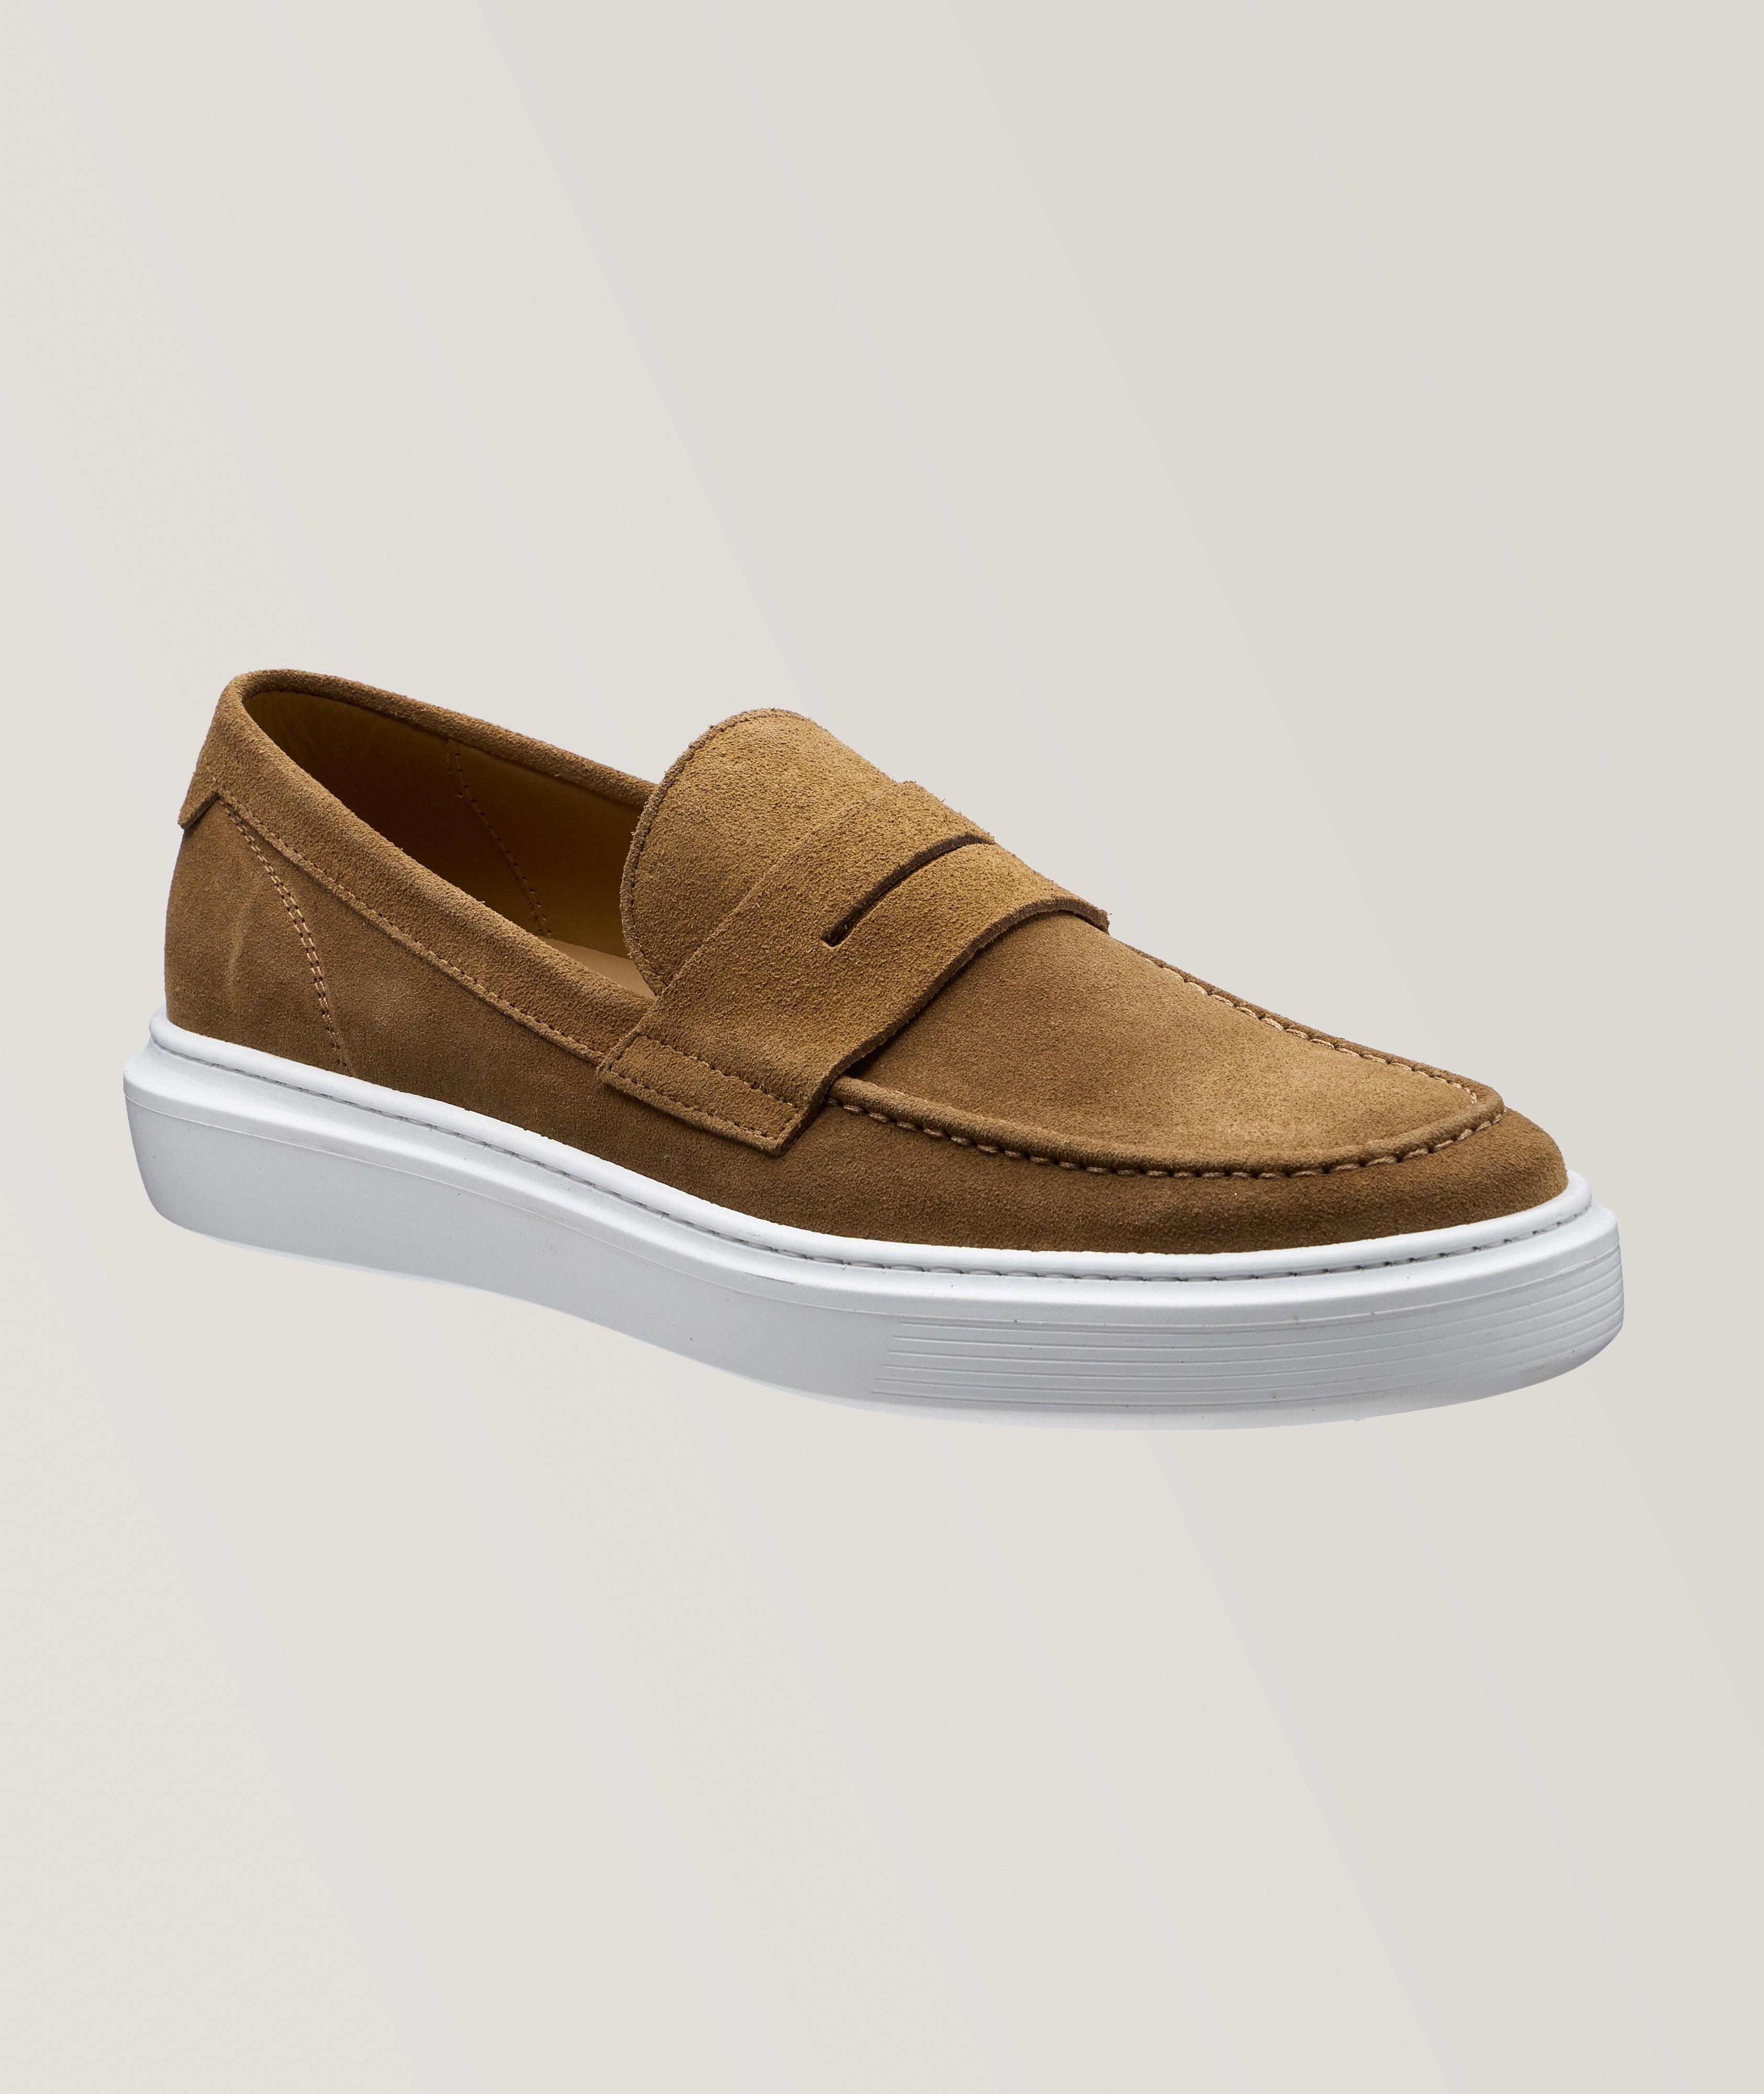 Legend London Suede Loafers